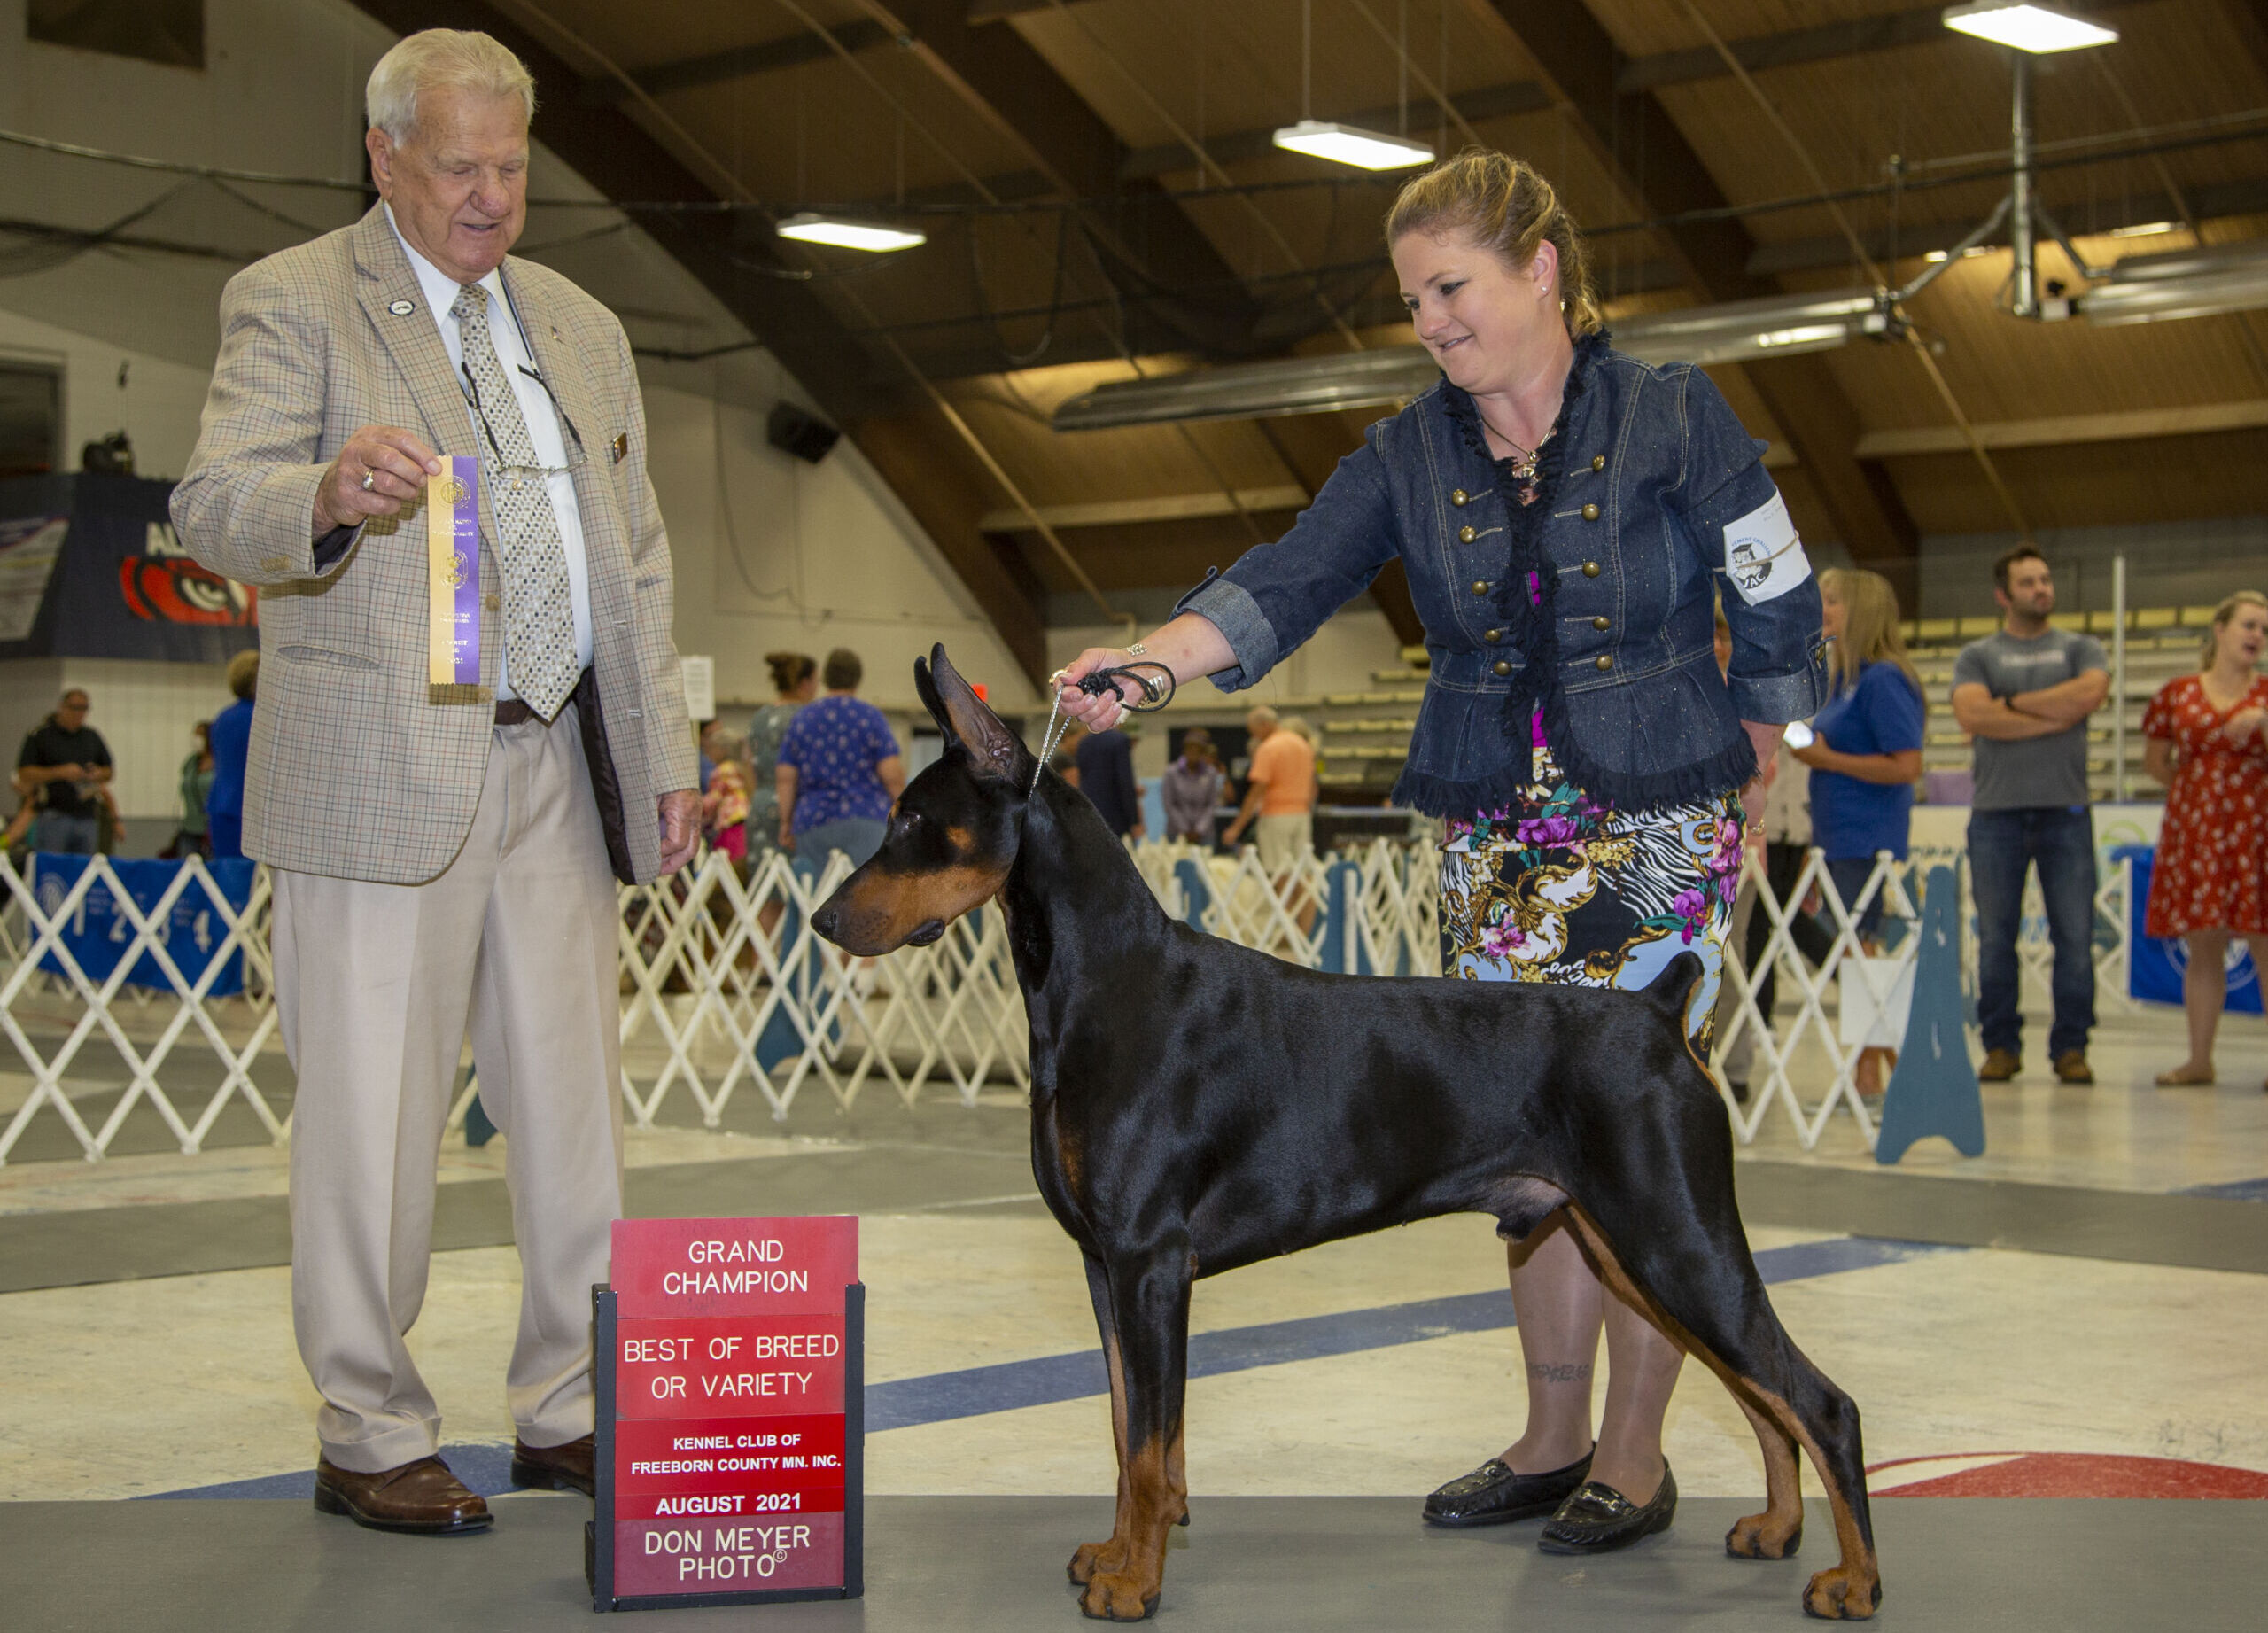 Grand Champion Best of Breed or Variety